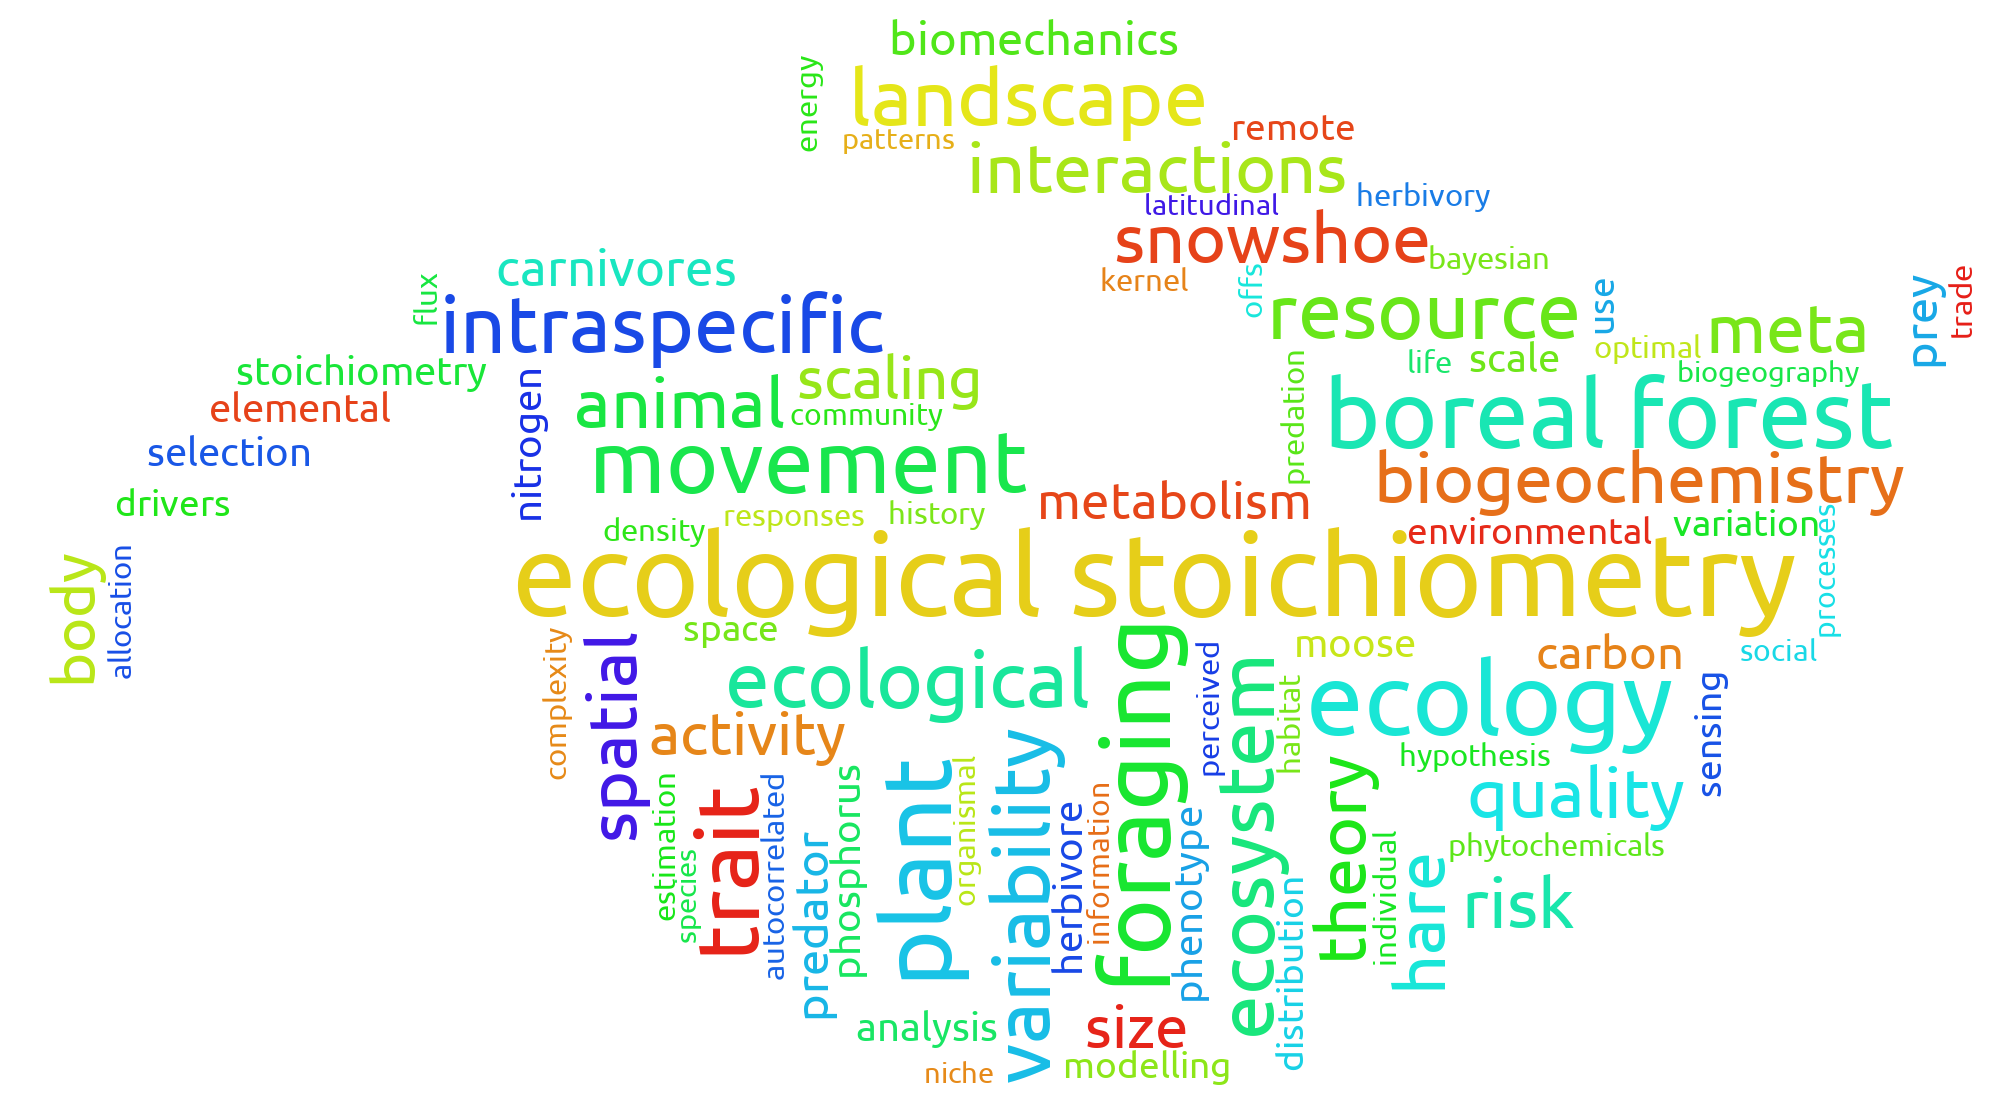 A word cloud of keywords from my published papers, in the shape of a leaf